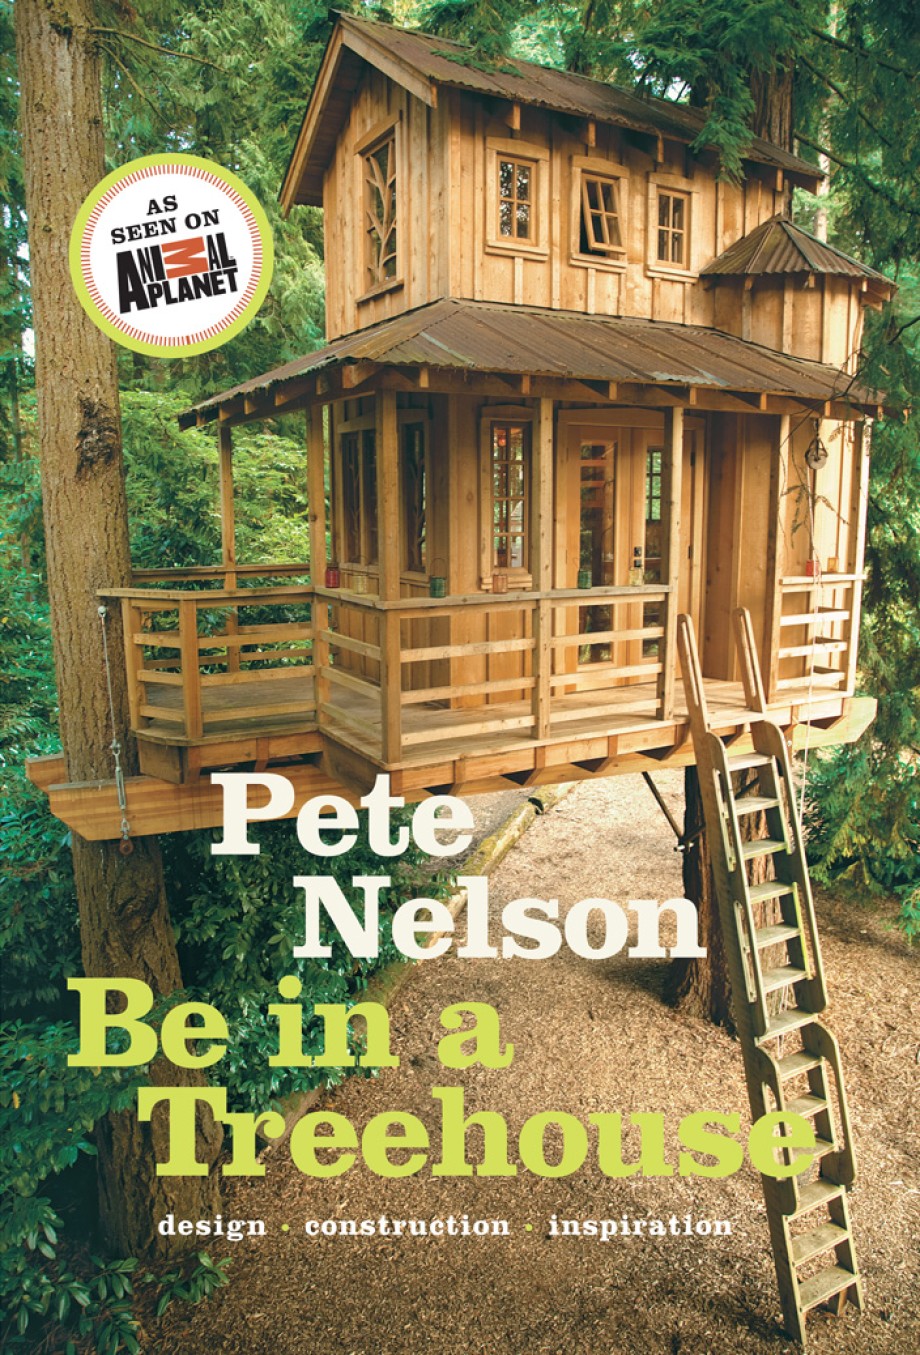 Be in a Treehouse Design / Construction / Inspiration